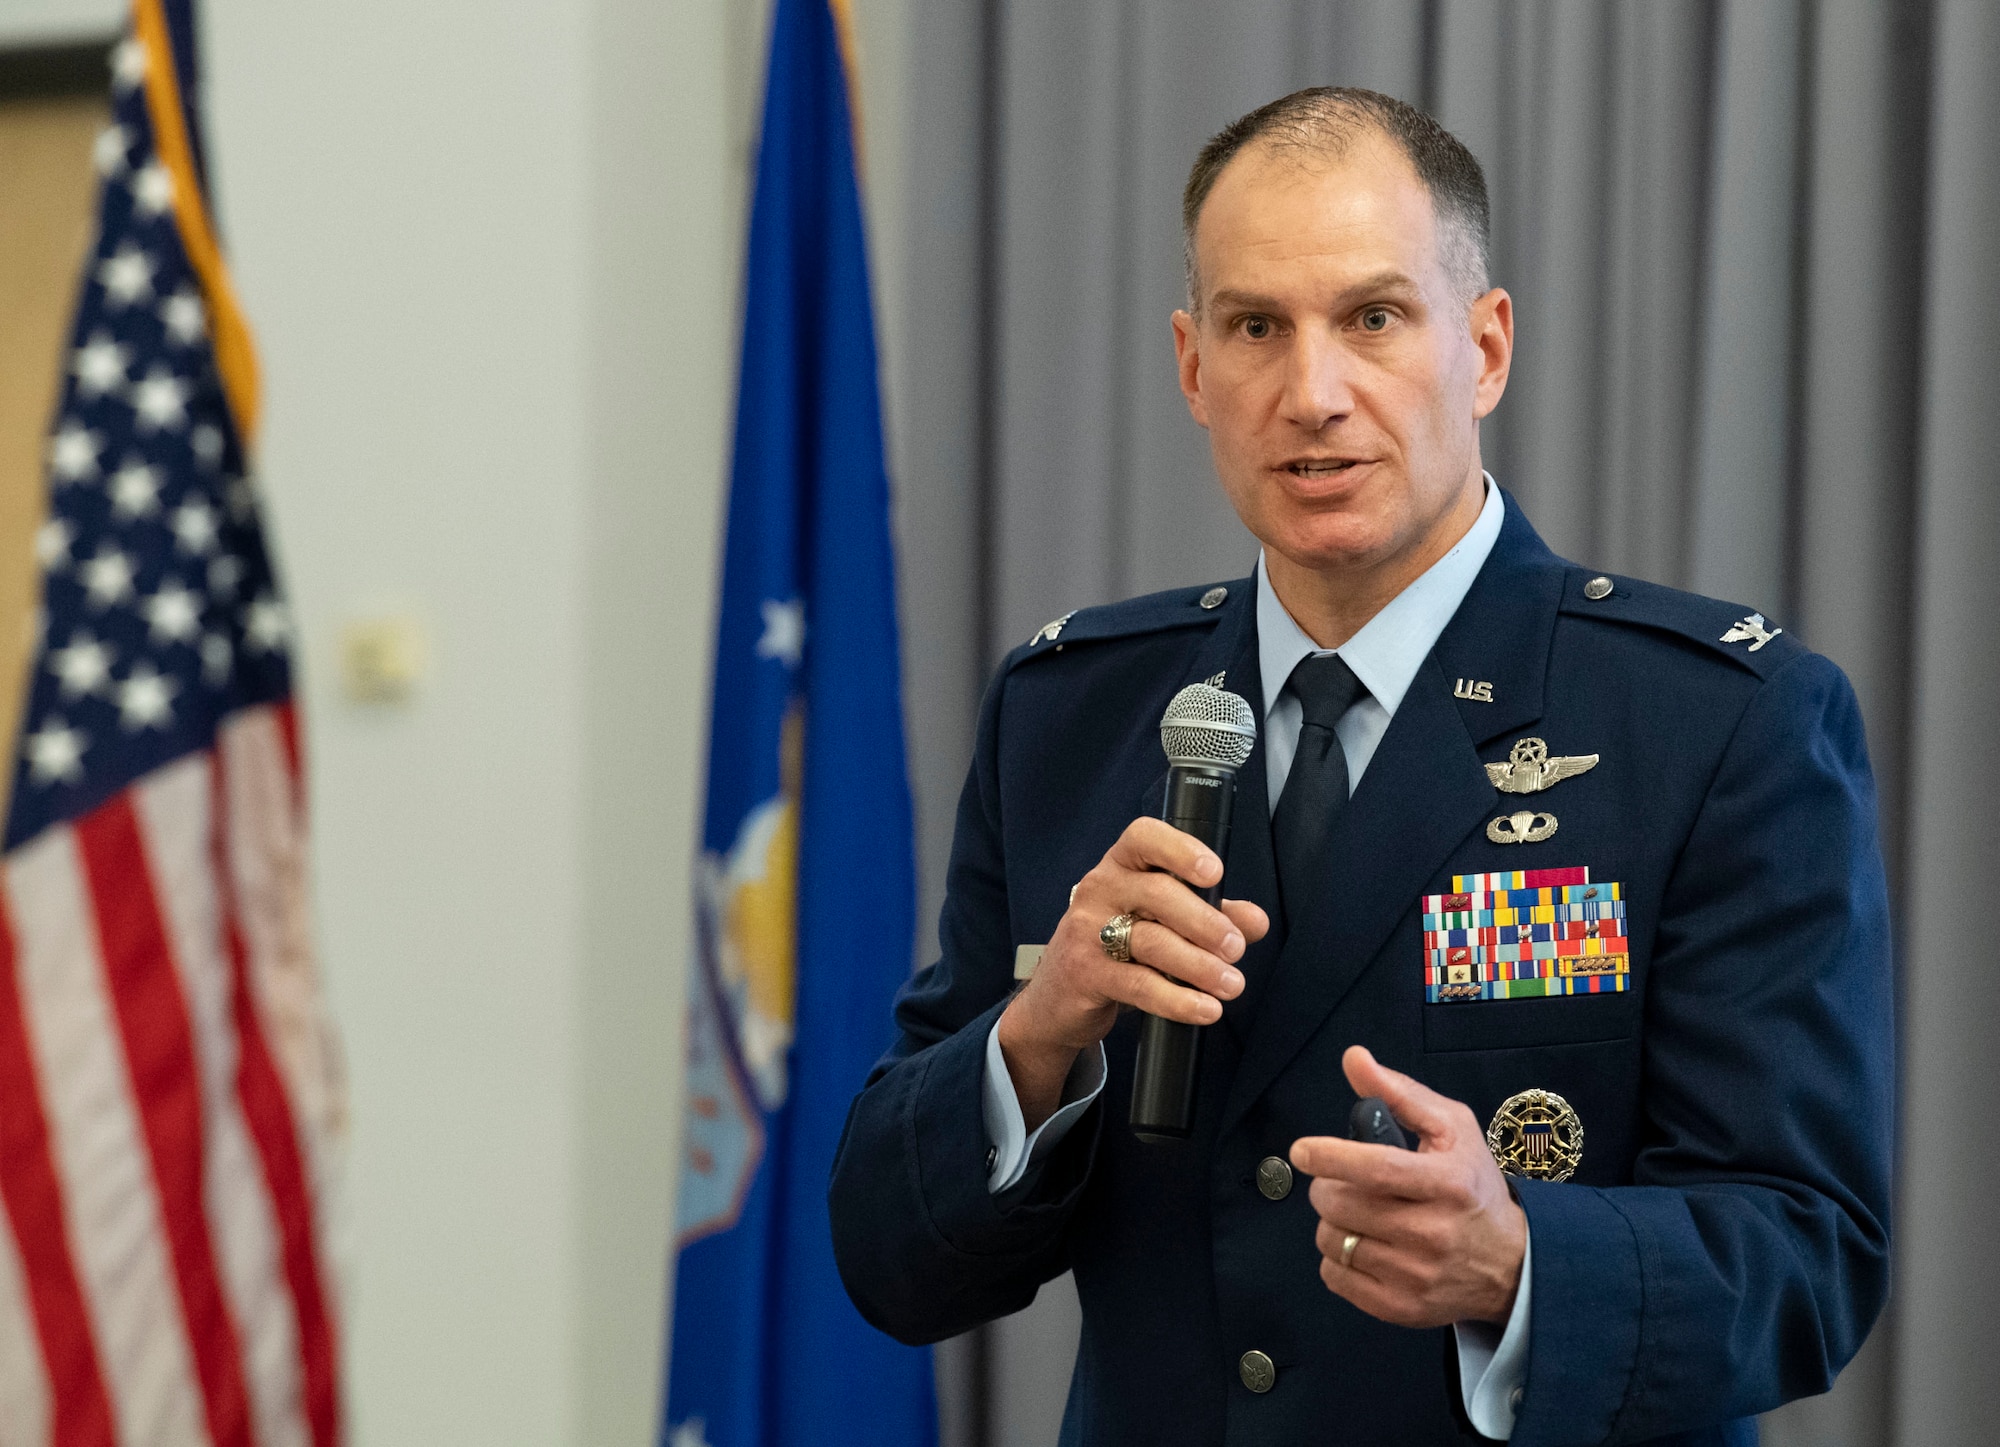 Col. Matt Husemann, 436th Airlift Wing commander, addresses attendees at the 2021 State of the Base briefing on Dover Air Force Base, Delaware, Nov. 22, 2021. The event was hosted by the Central Delaware Chamber of Commerce and provided an opportunity to educate and inform community members and leaders on how the Dover community ties into the base’s mission, vision and priorities. (U.S. Air Force photo by Roland Balik)